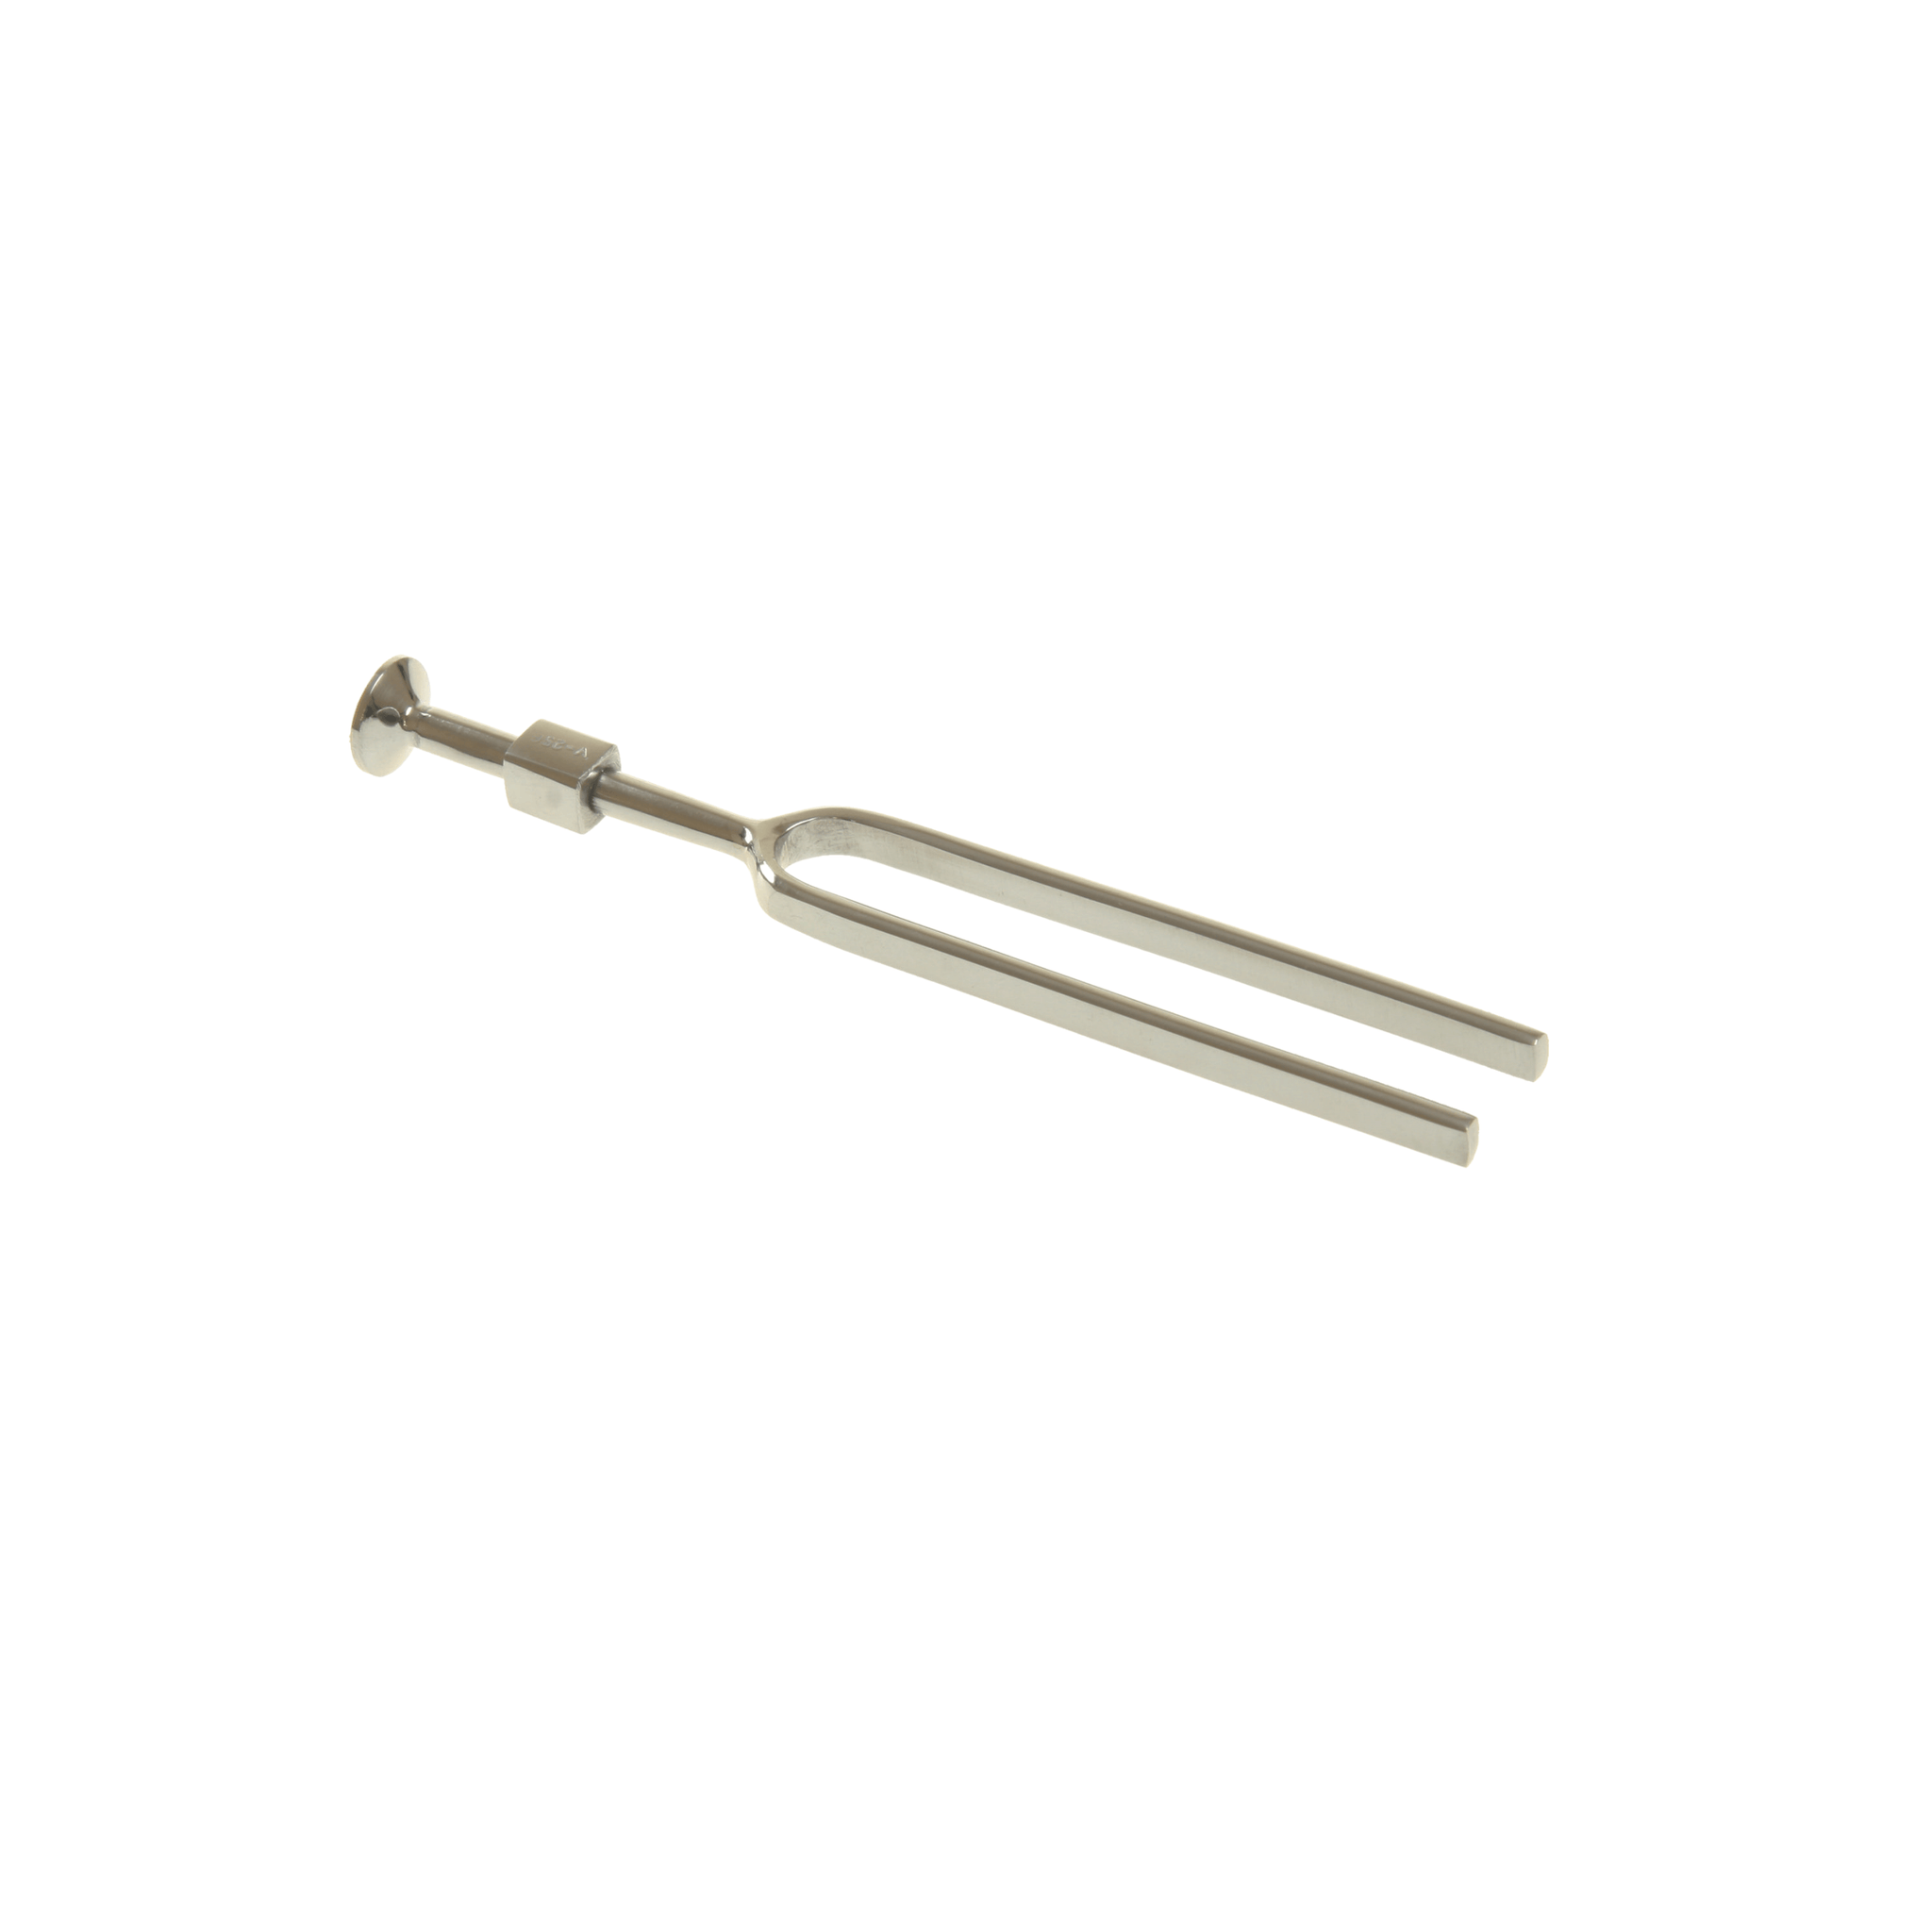 Basic Tuning Fork with Foot- Stainless Steel, C256